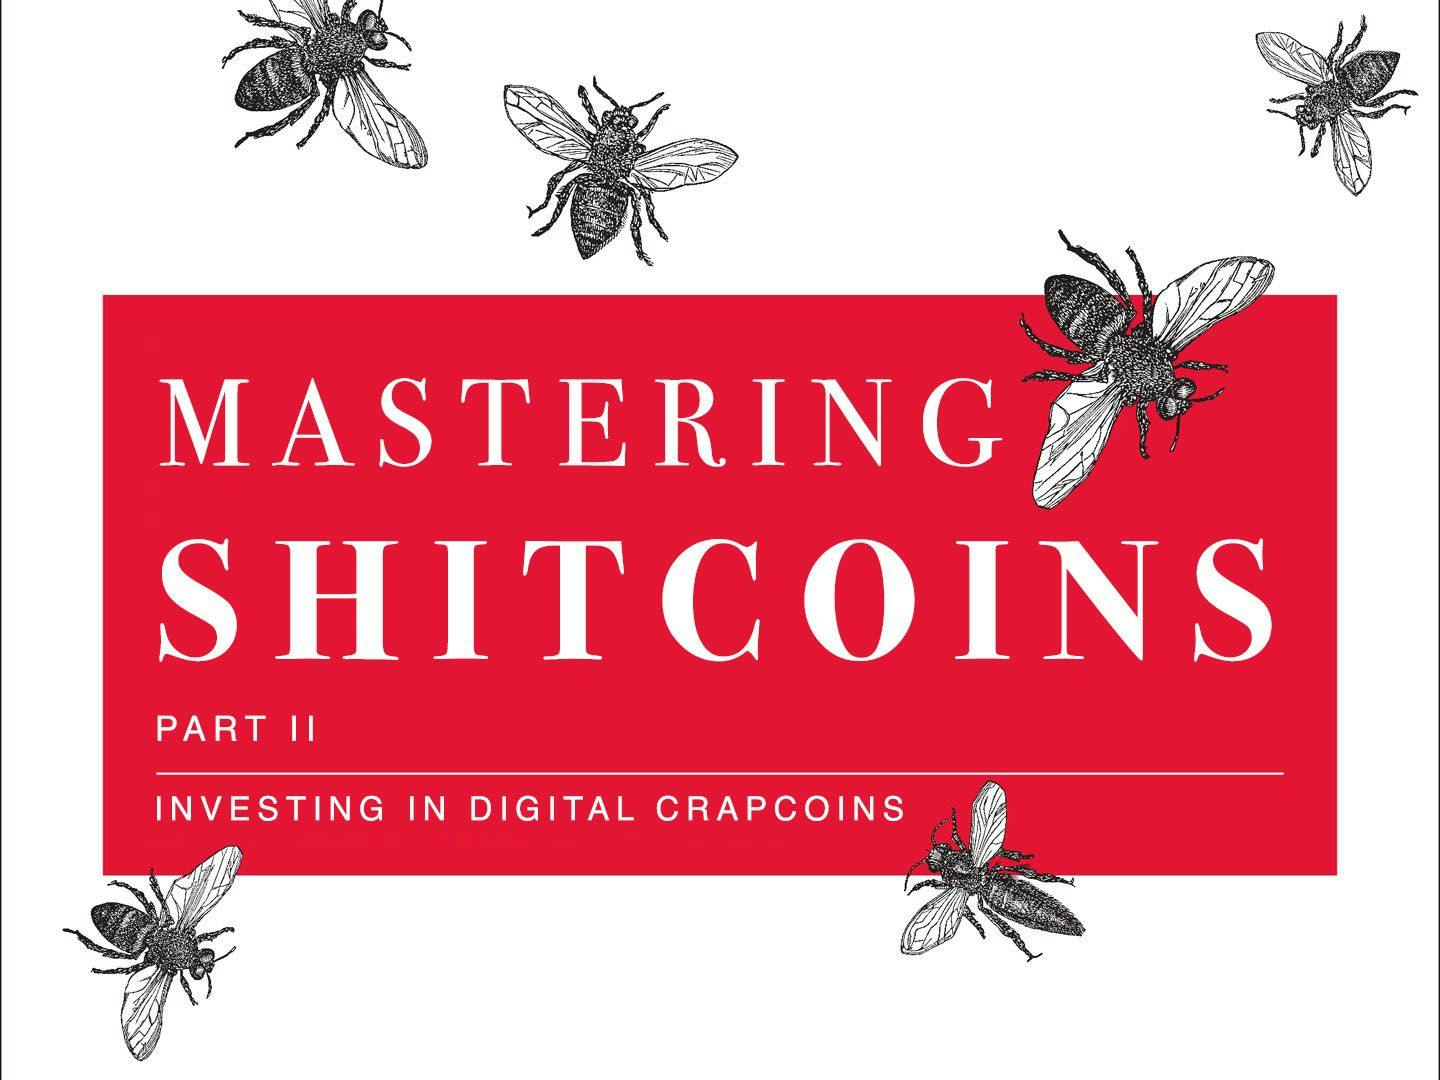 /mastering-shitcoins-ii-the-poor-mans-guide-to-getting-rich-nvo33j3 feature image